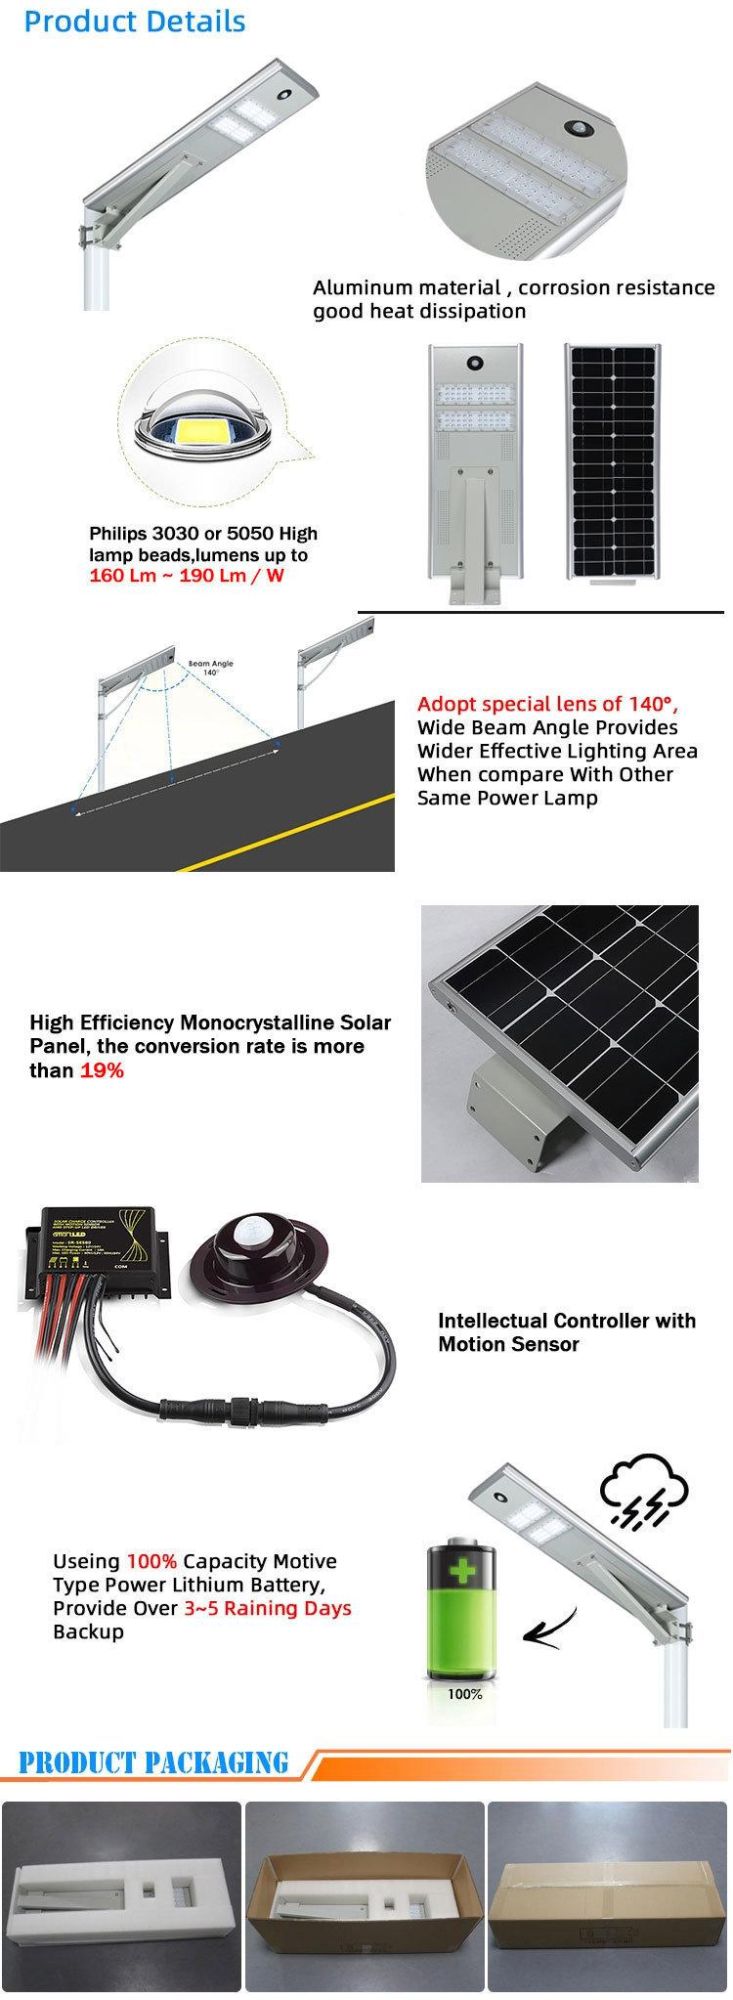 New Product Hot Sale 50W New Model Design All in One Solar Street Light